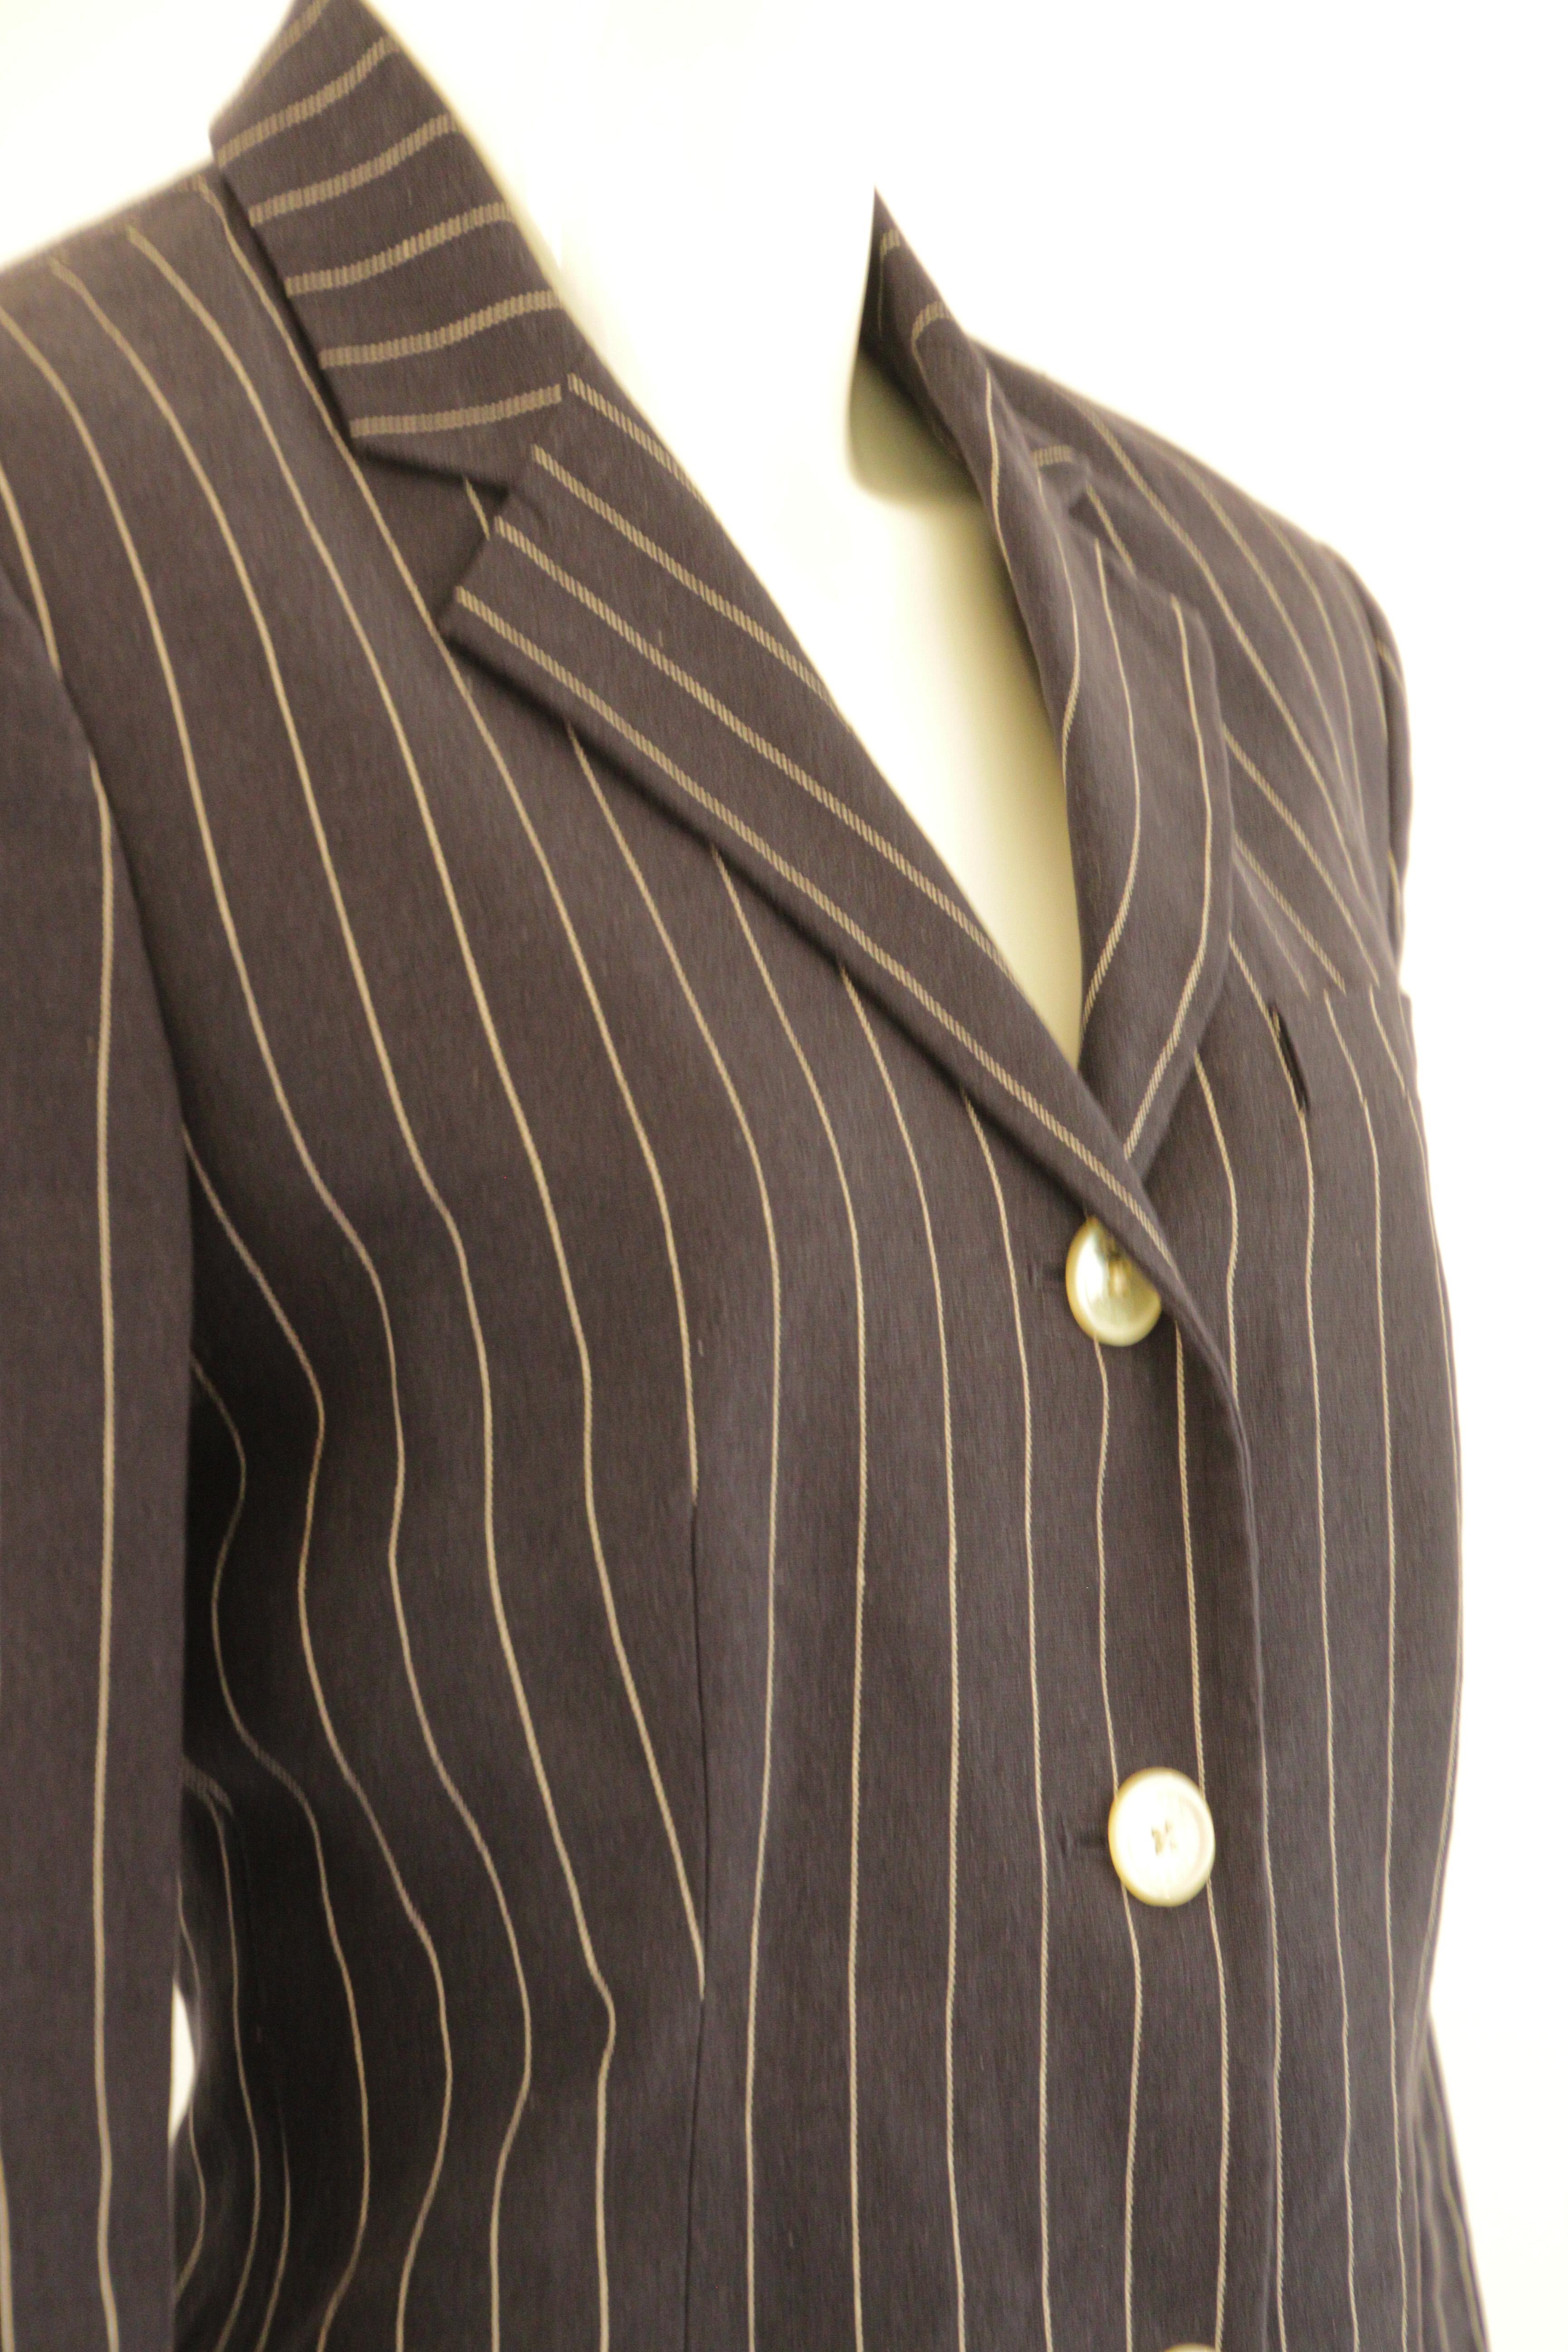 Ralph Lauren Vintage Black and White Pinstripe Blazer In Good Condition For Sale In North Hollywood, CA